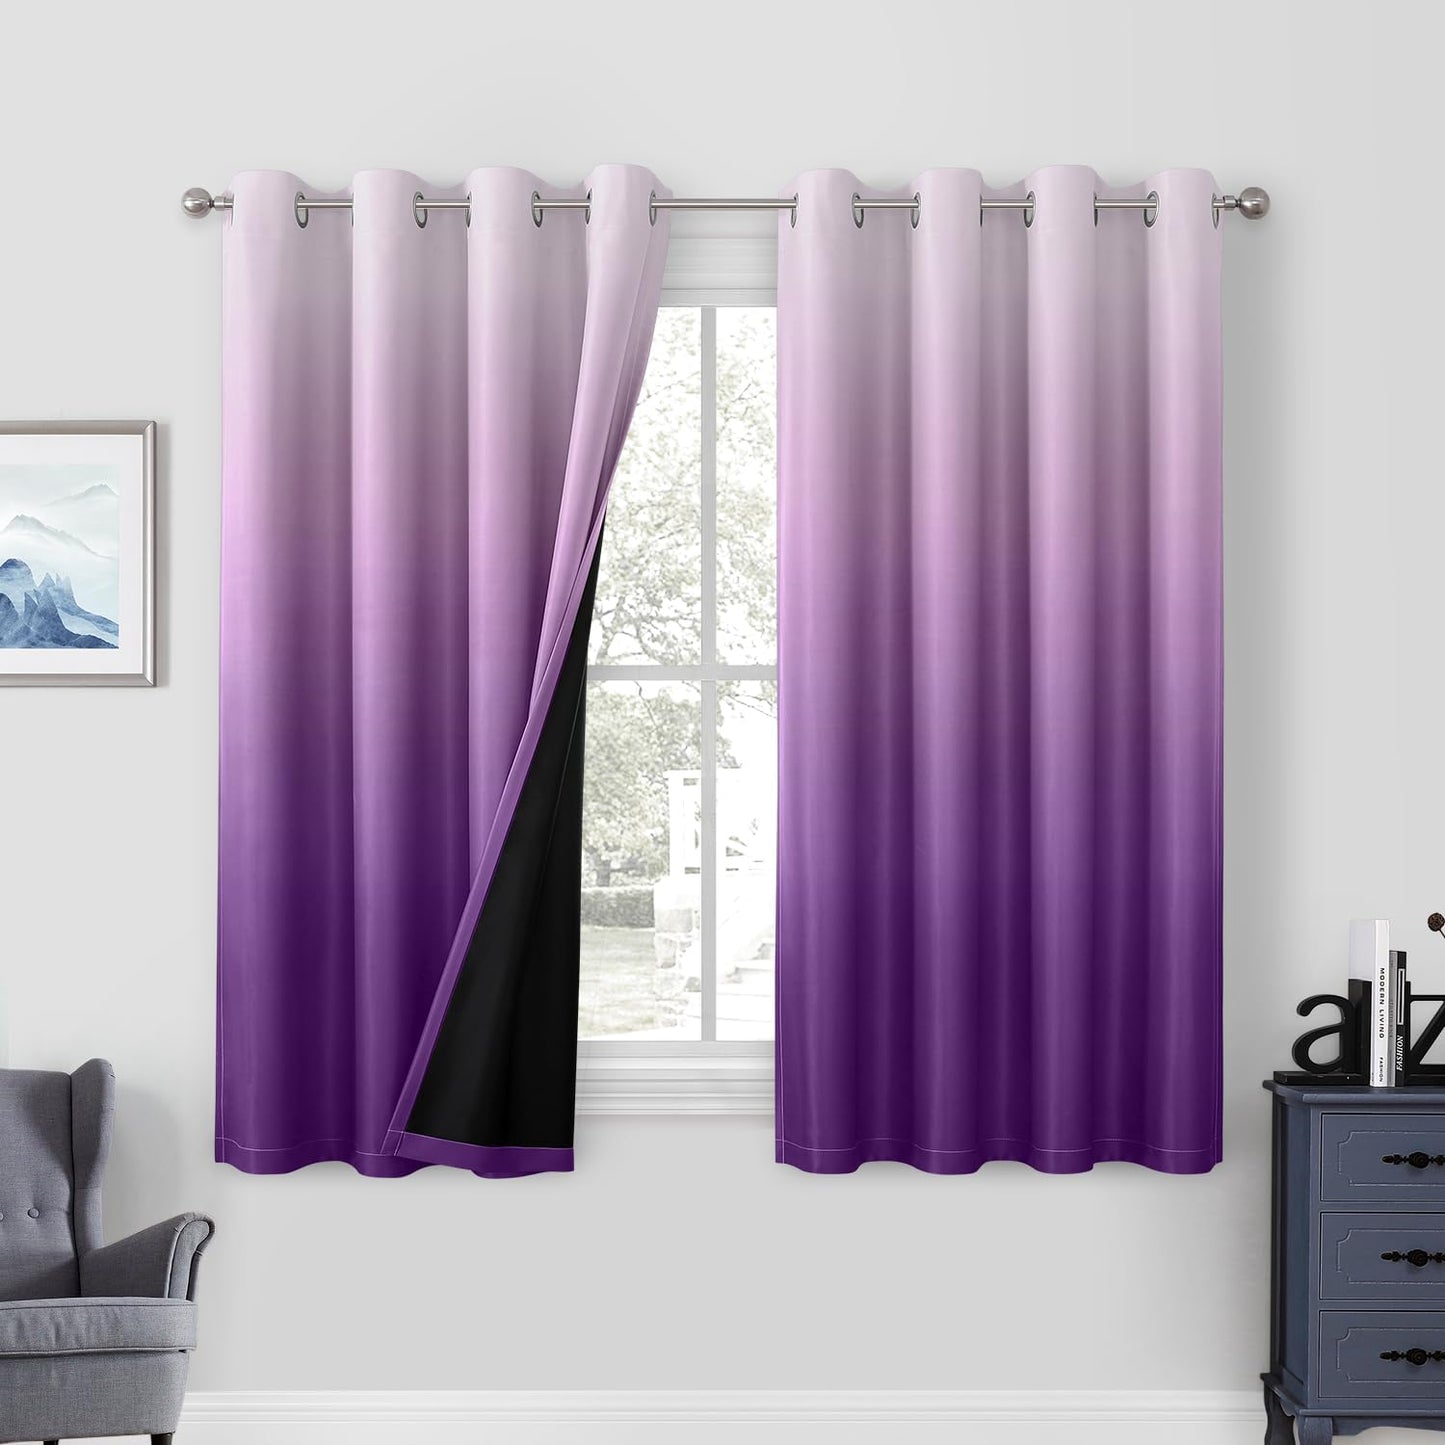 HOMEIDEAS 100% Black Ombre Blackout Curtains for Bedroom, Room Darkening Curtains 52 X 84 Inches Long Grommet Gradient Drapes, Light Blocking Thermal Insulated Curtains for Living Room, 2 Panels  HOMEIDEAS Purple 2 Panel-52" X 63" 